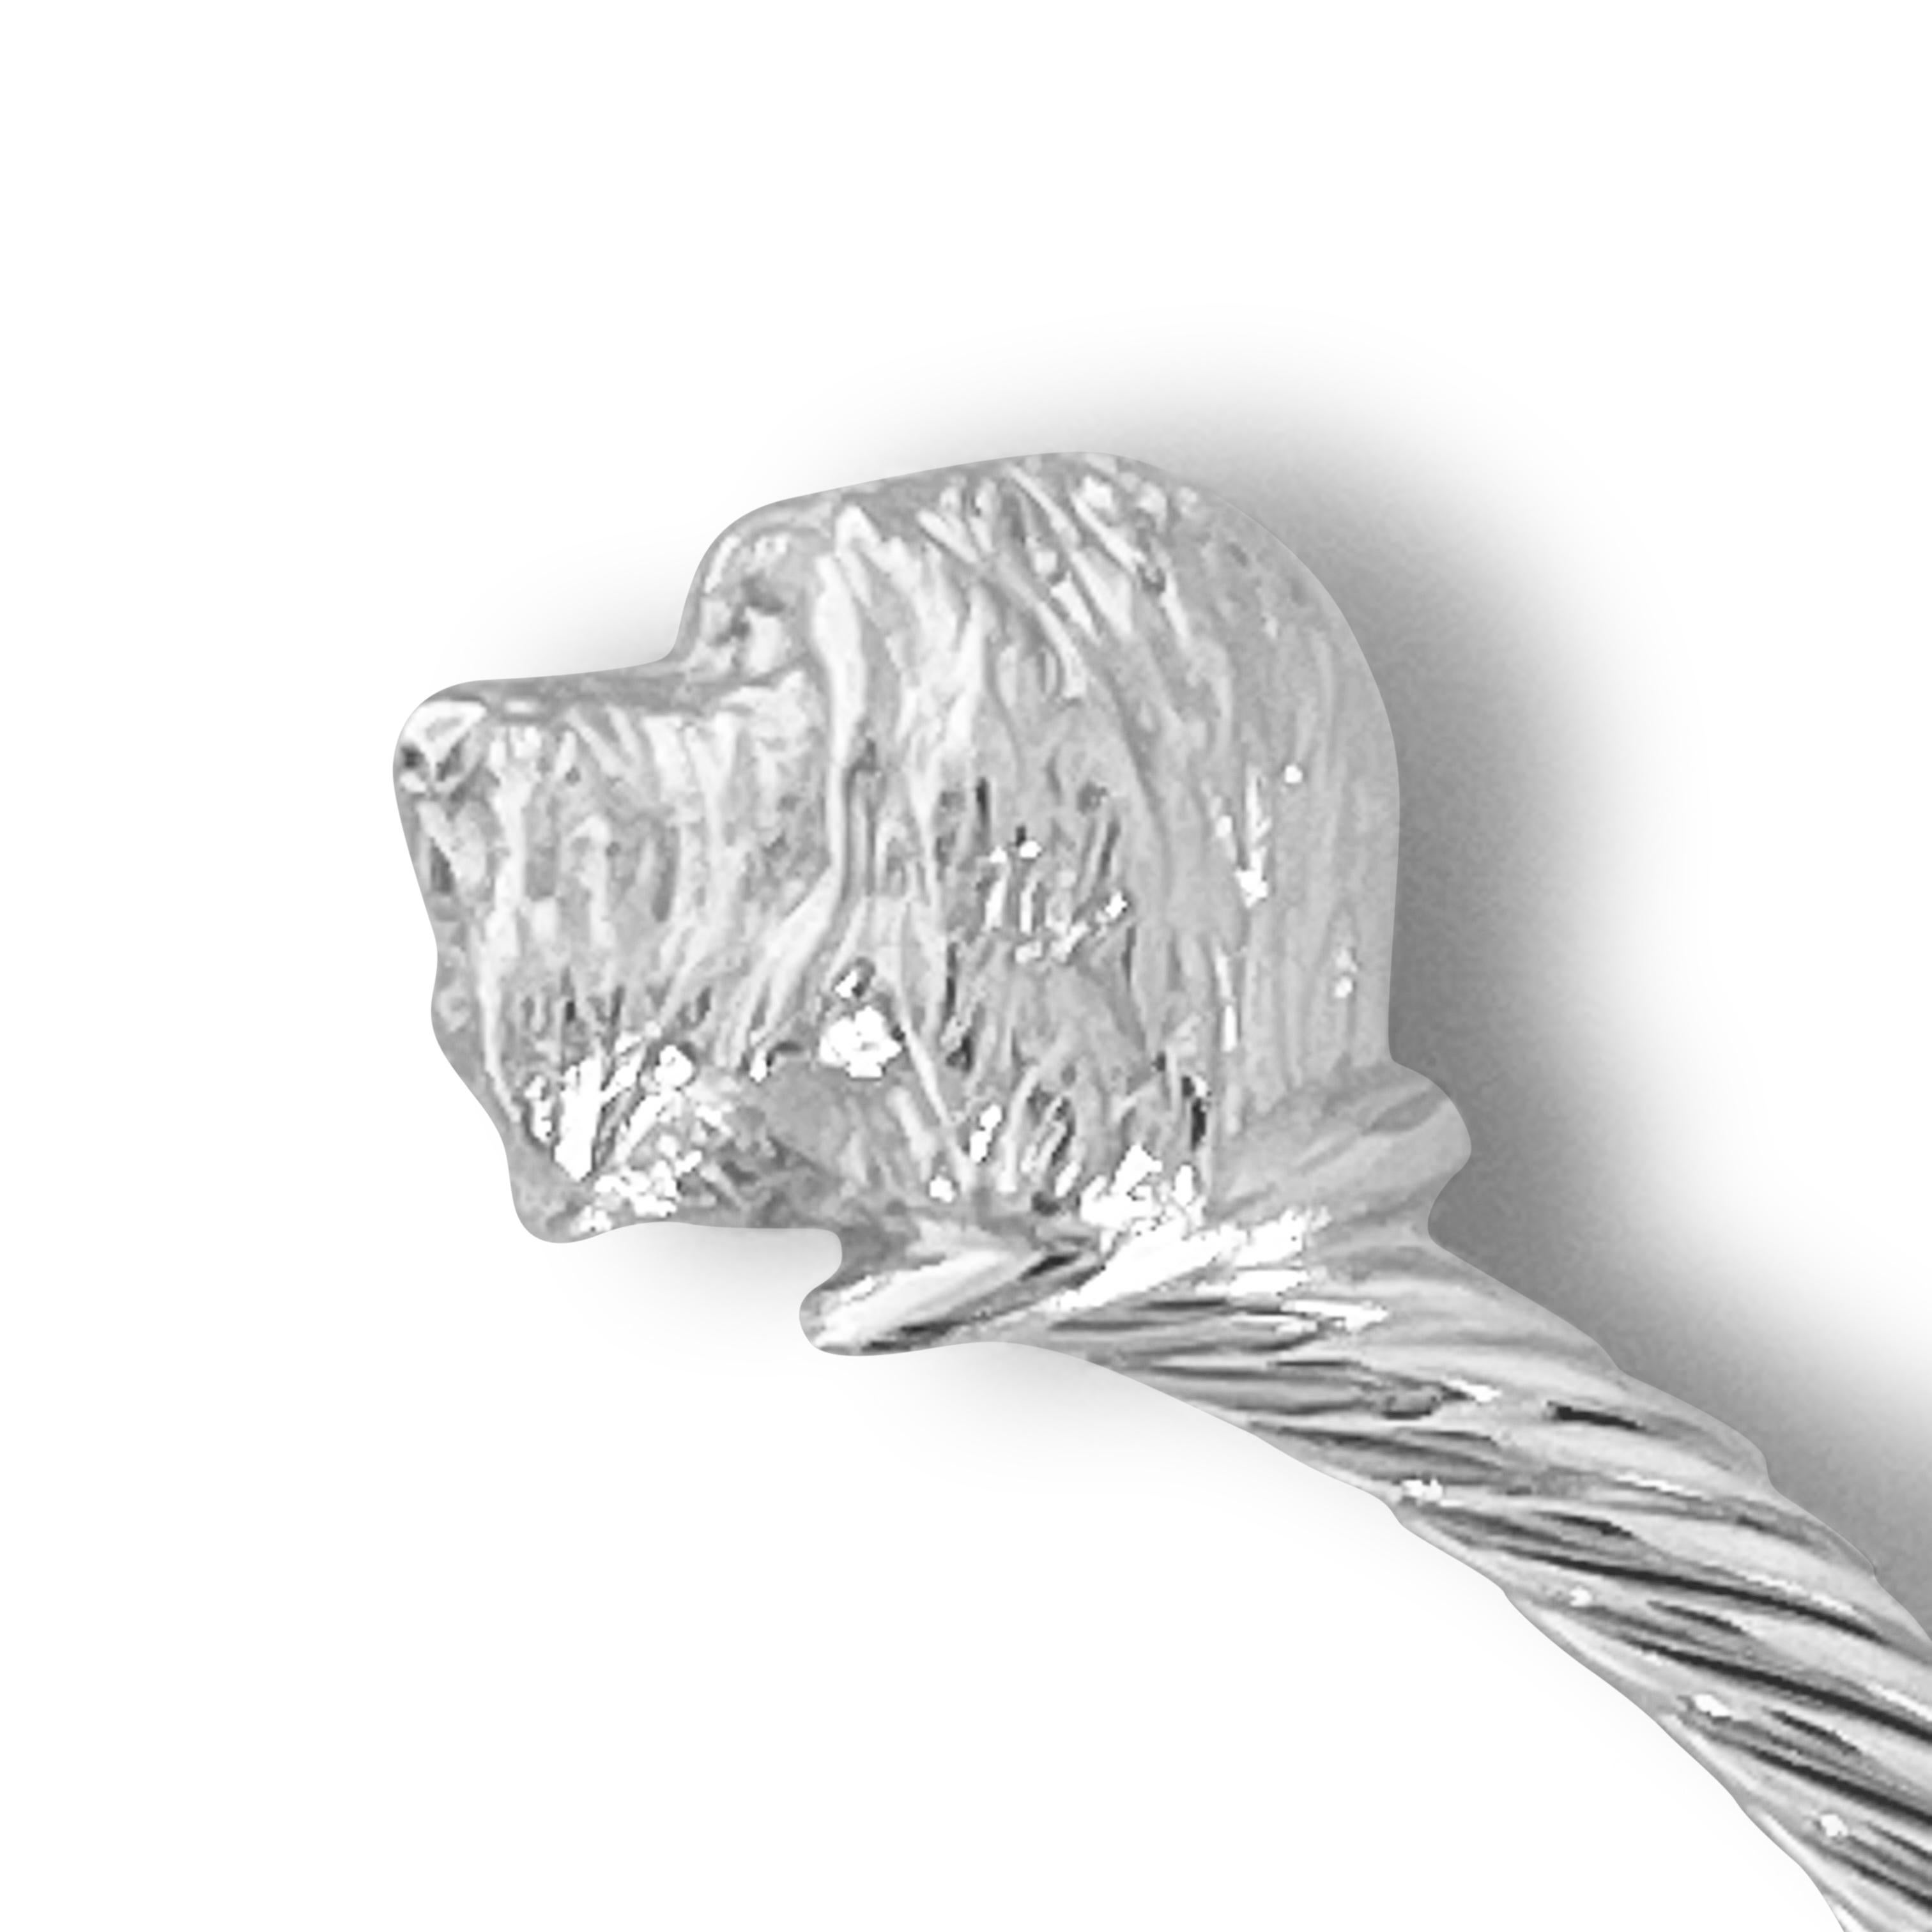 Artisan Paul Eaton Sculpted Tibetan Terrier Dog Heads on Twisted Bangle in Sterling For Sale